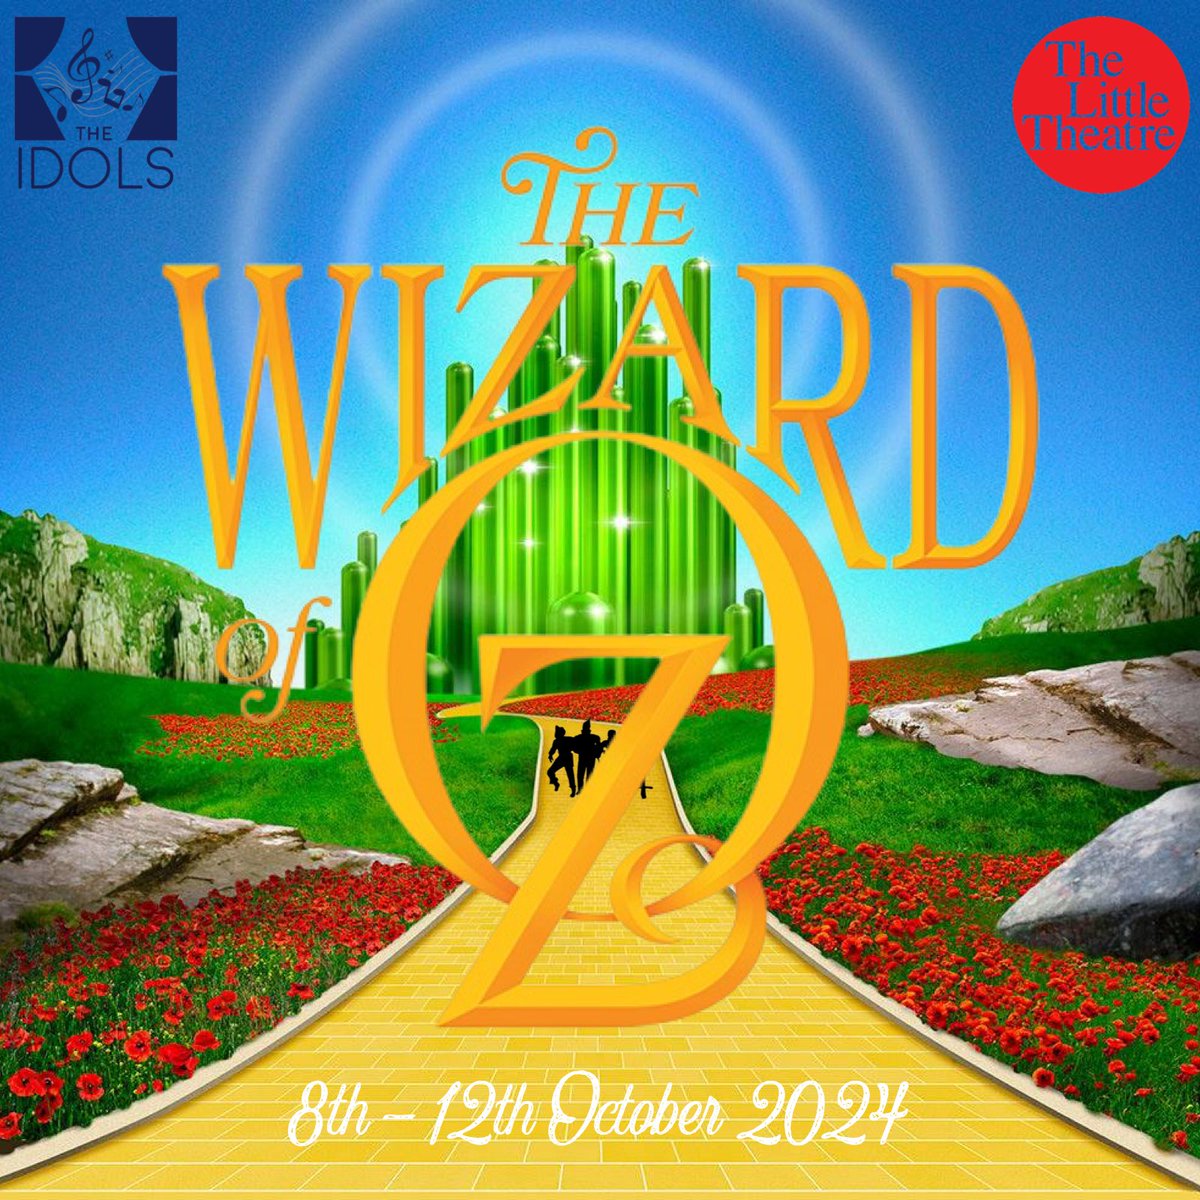 We are incredibly excited to announce our October 2024 production at The Little Theatre will be The Wizard of Oz 🌈 More information regarding our amazing production team, new members and children’s auditions will be released next week #thewizardofoz